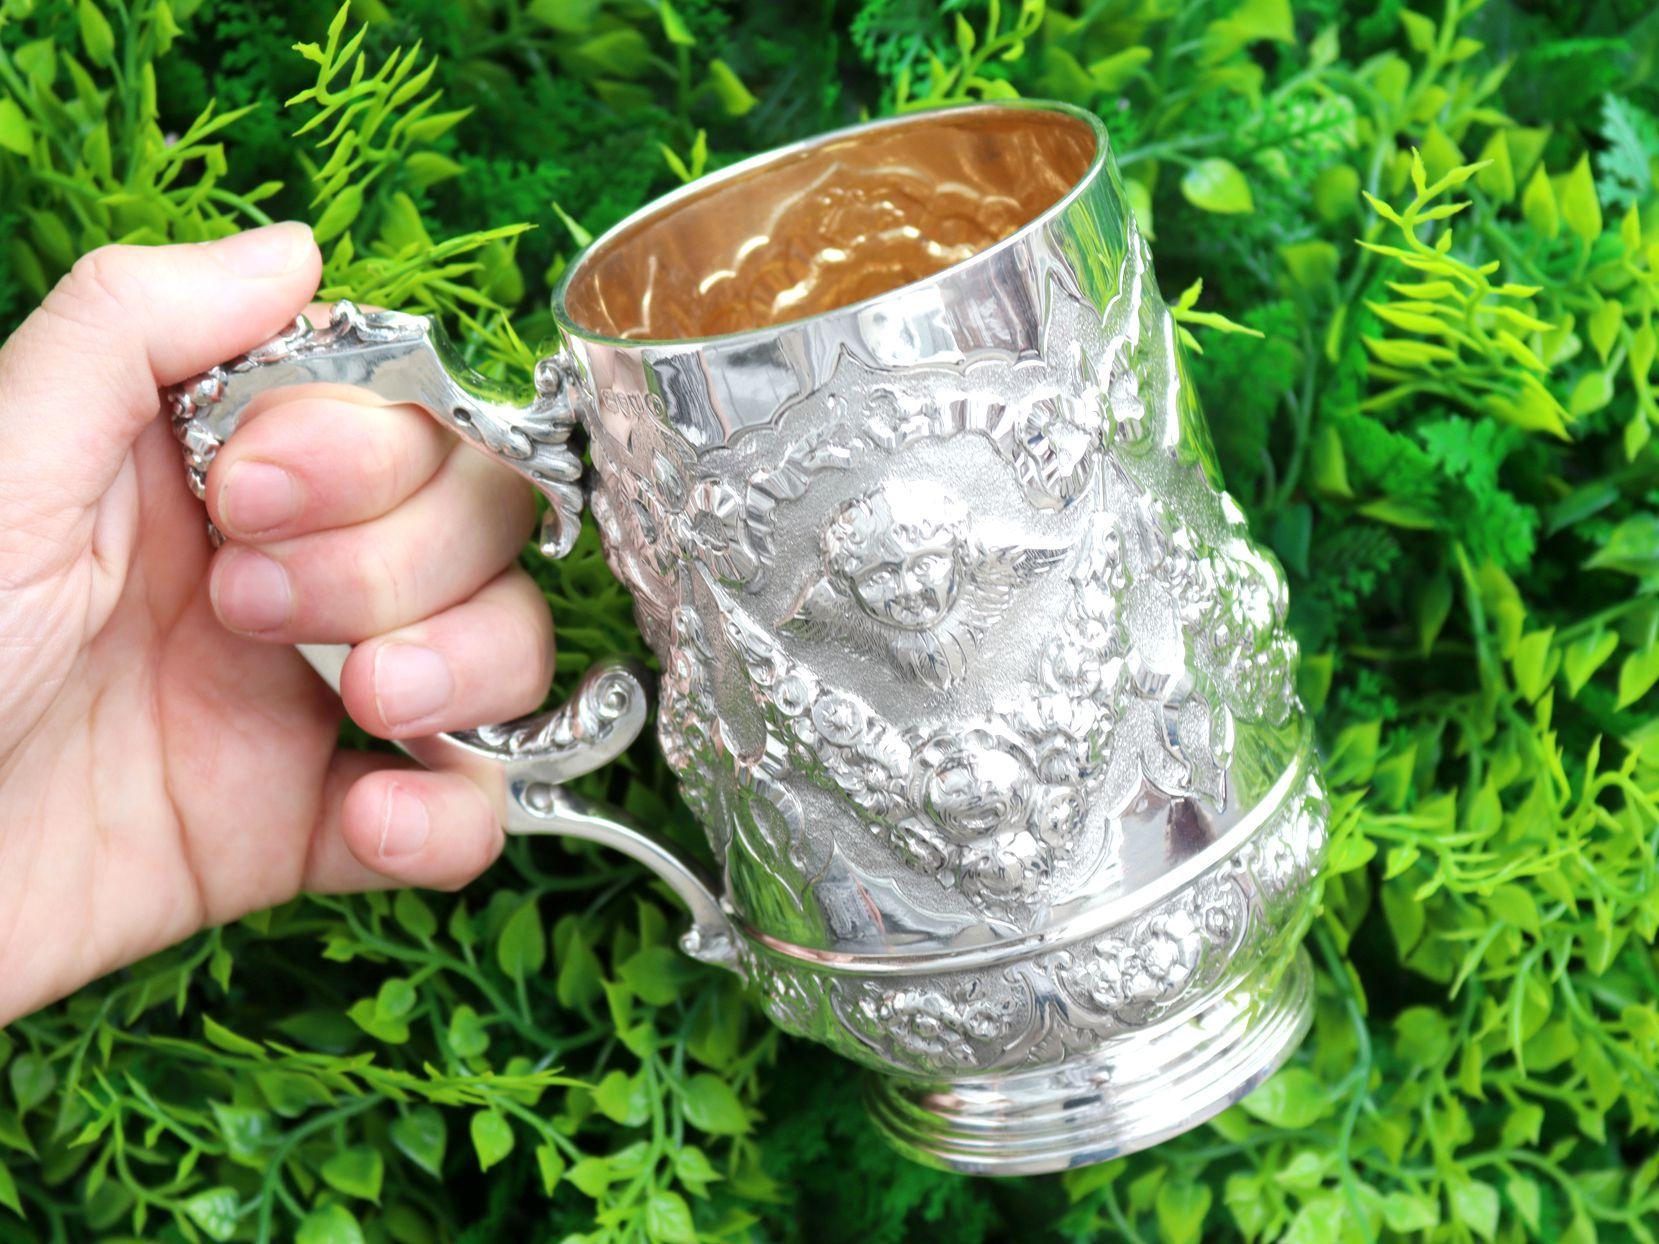 An exceptional, fine and impressive large antique Victorian English sterling silver christening mug; part of our silver christening collection

This antique Victorian silver christening mug has a circular, subtly tapering rounded form onto a